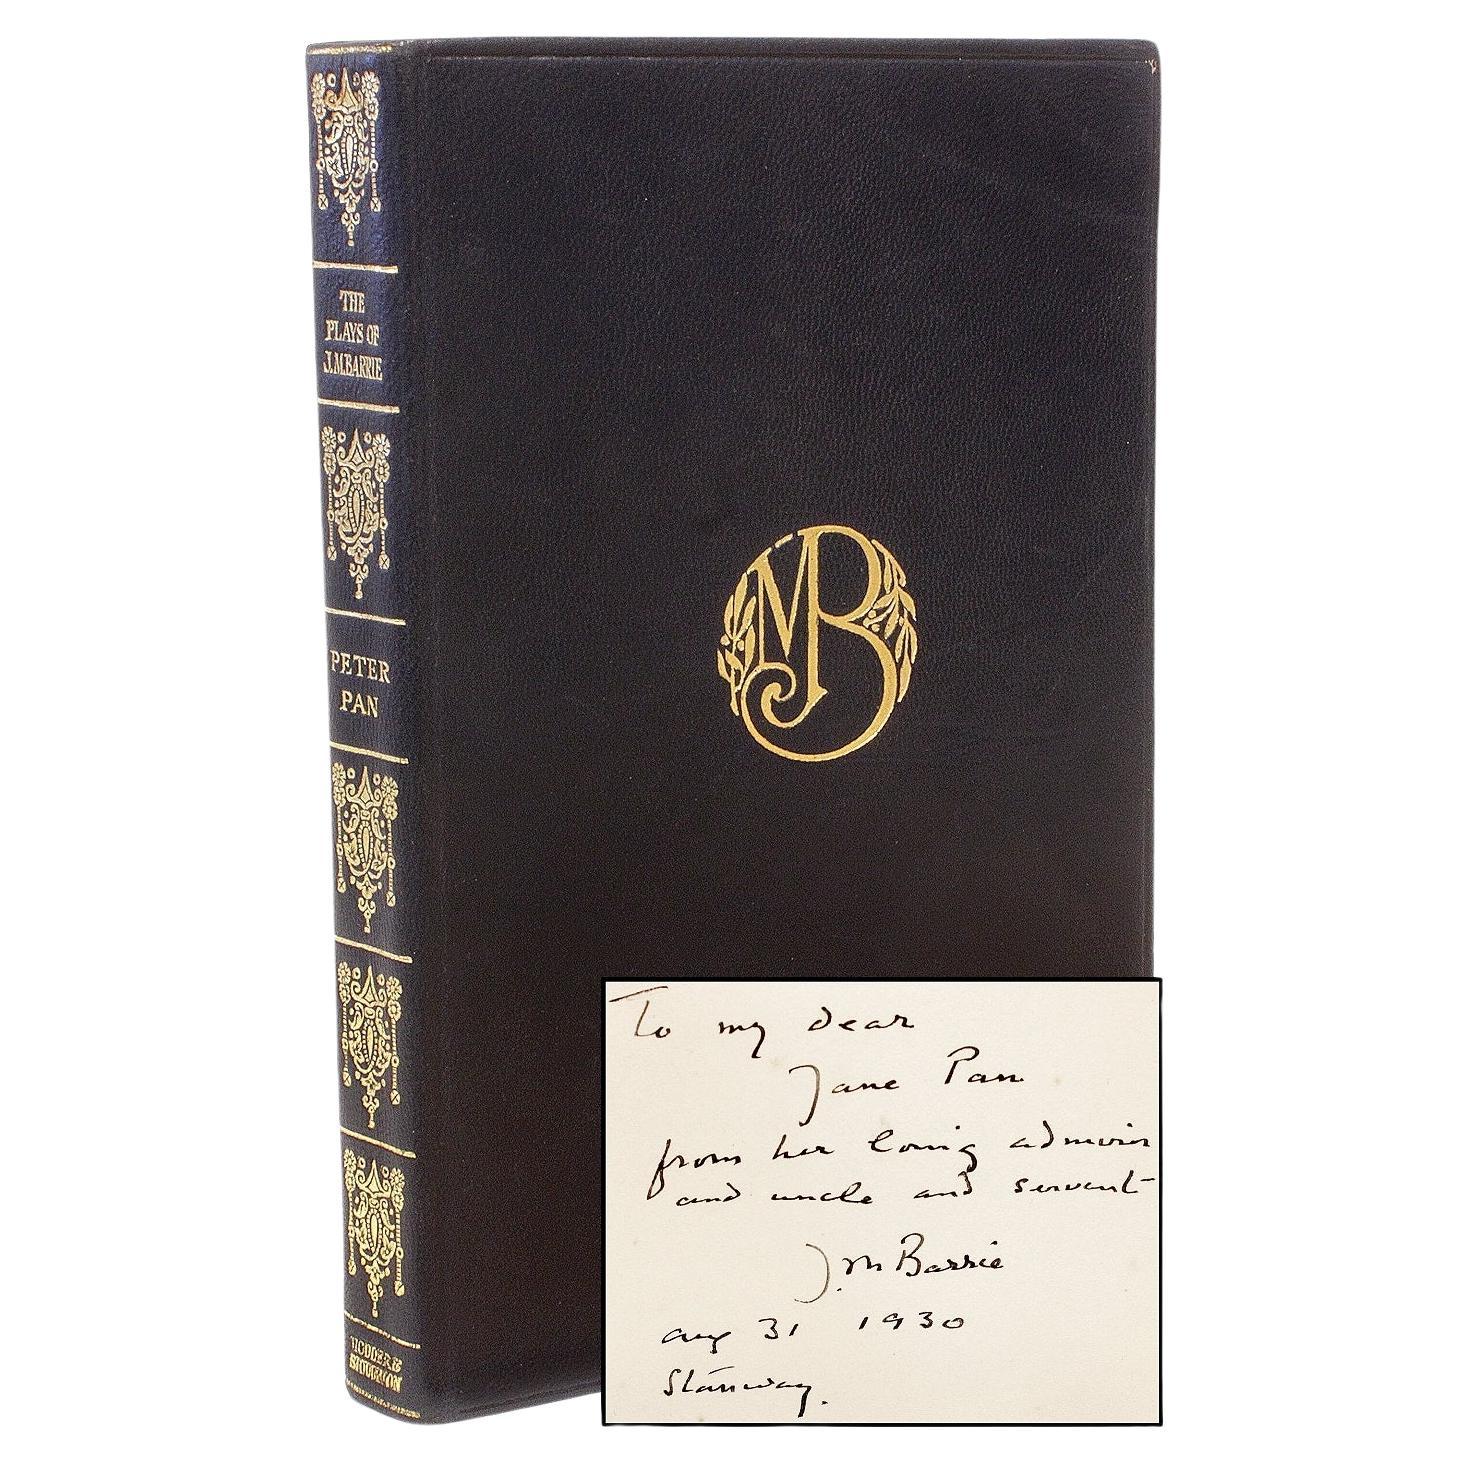 J. M. BARRIE - Peter Pan - FIRST PLAY EDITION - AN IMPORTANT PRESENTATION COPY For Sale